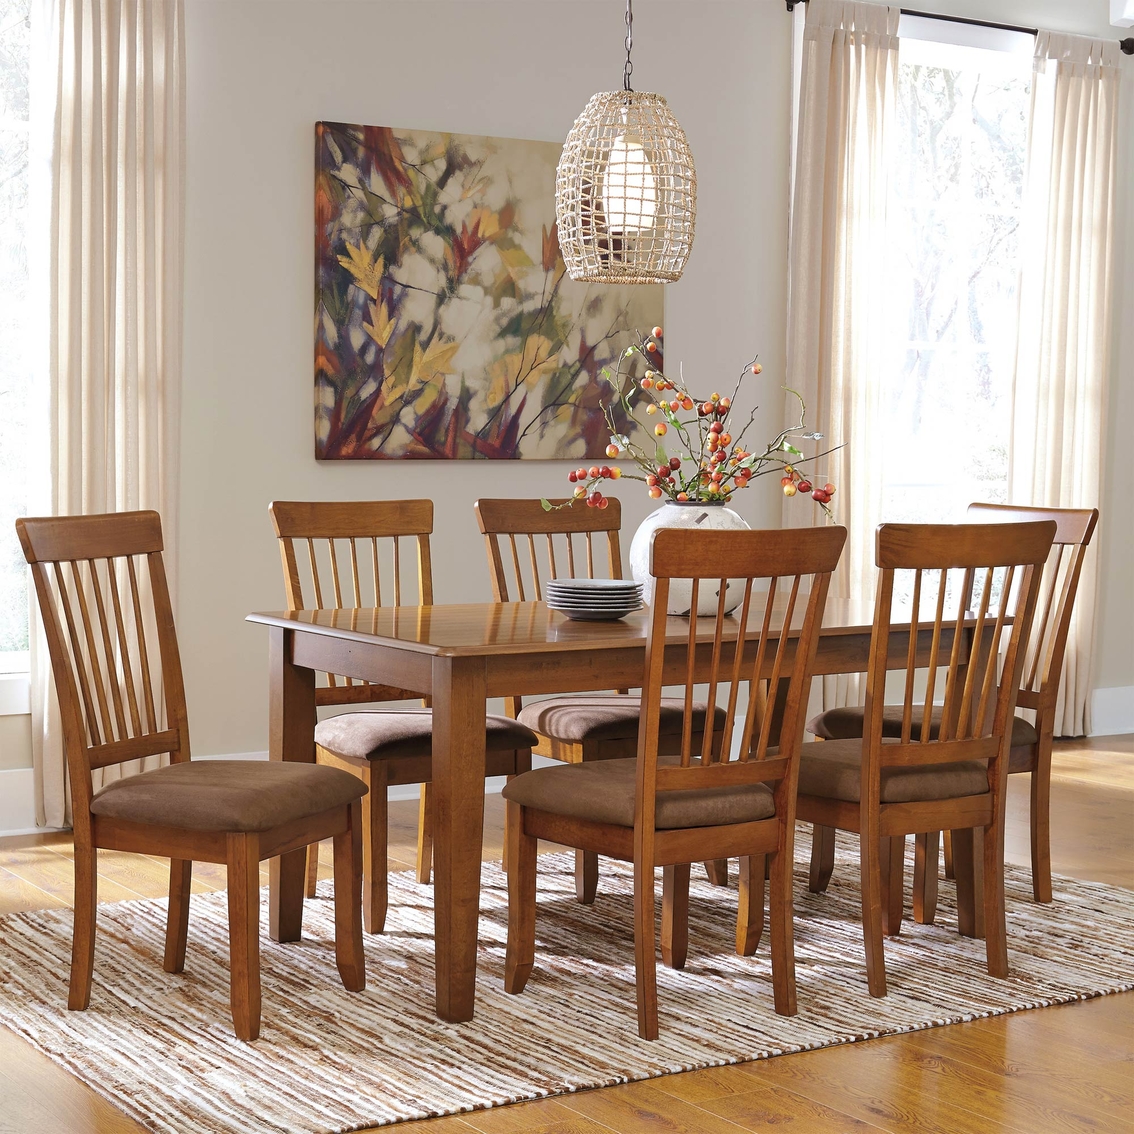 Signature Design by Ashley Berringer Dining Room Chair 2 Pk. - Image 3 of 3